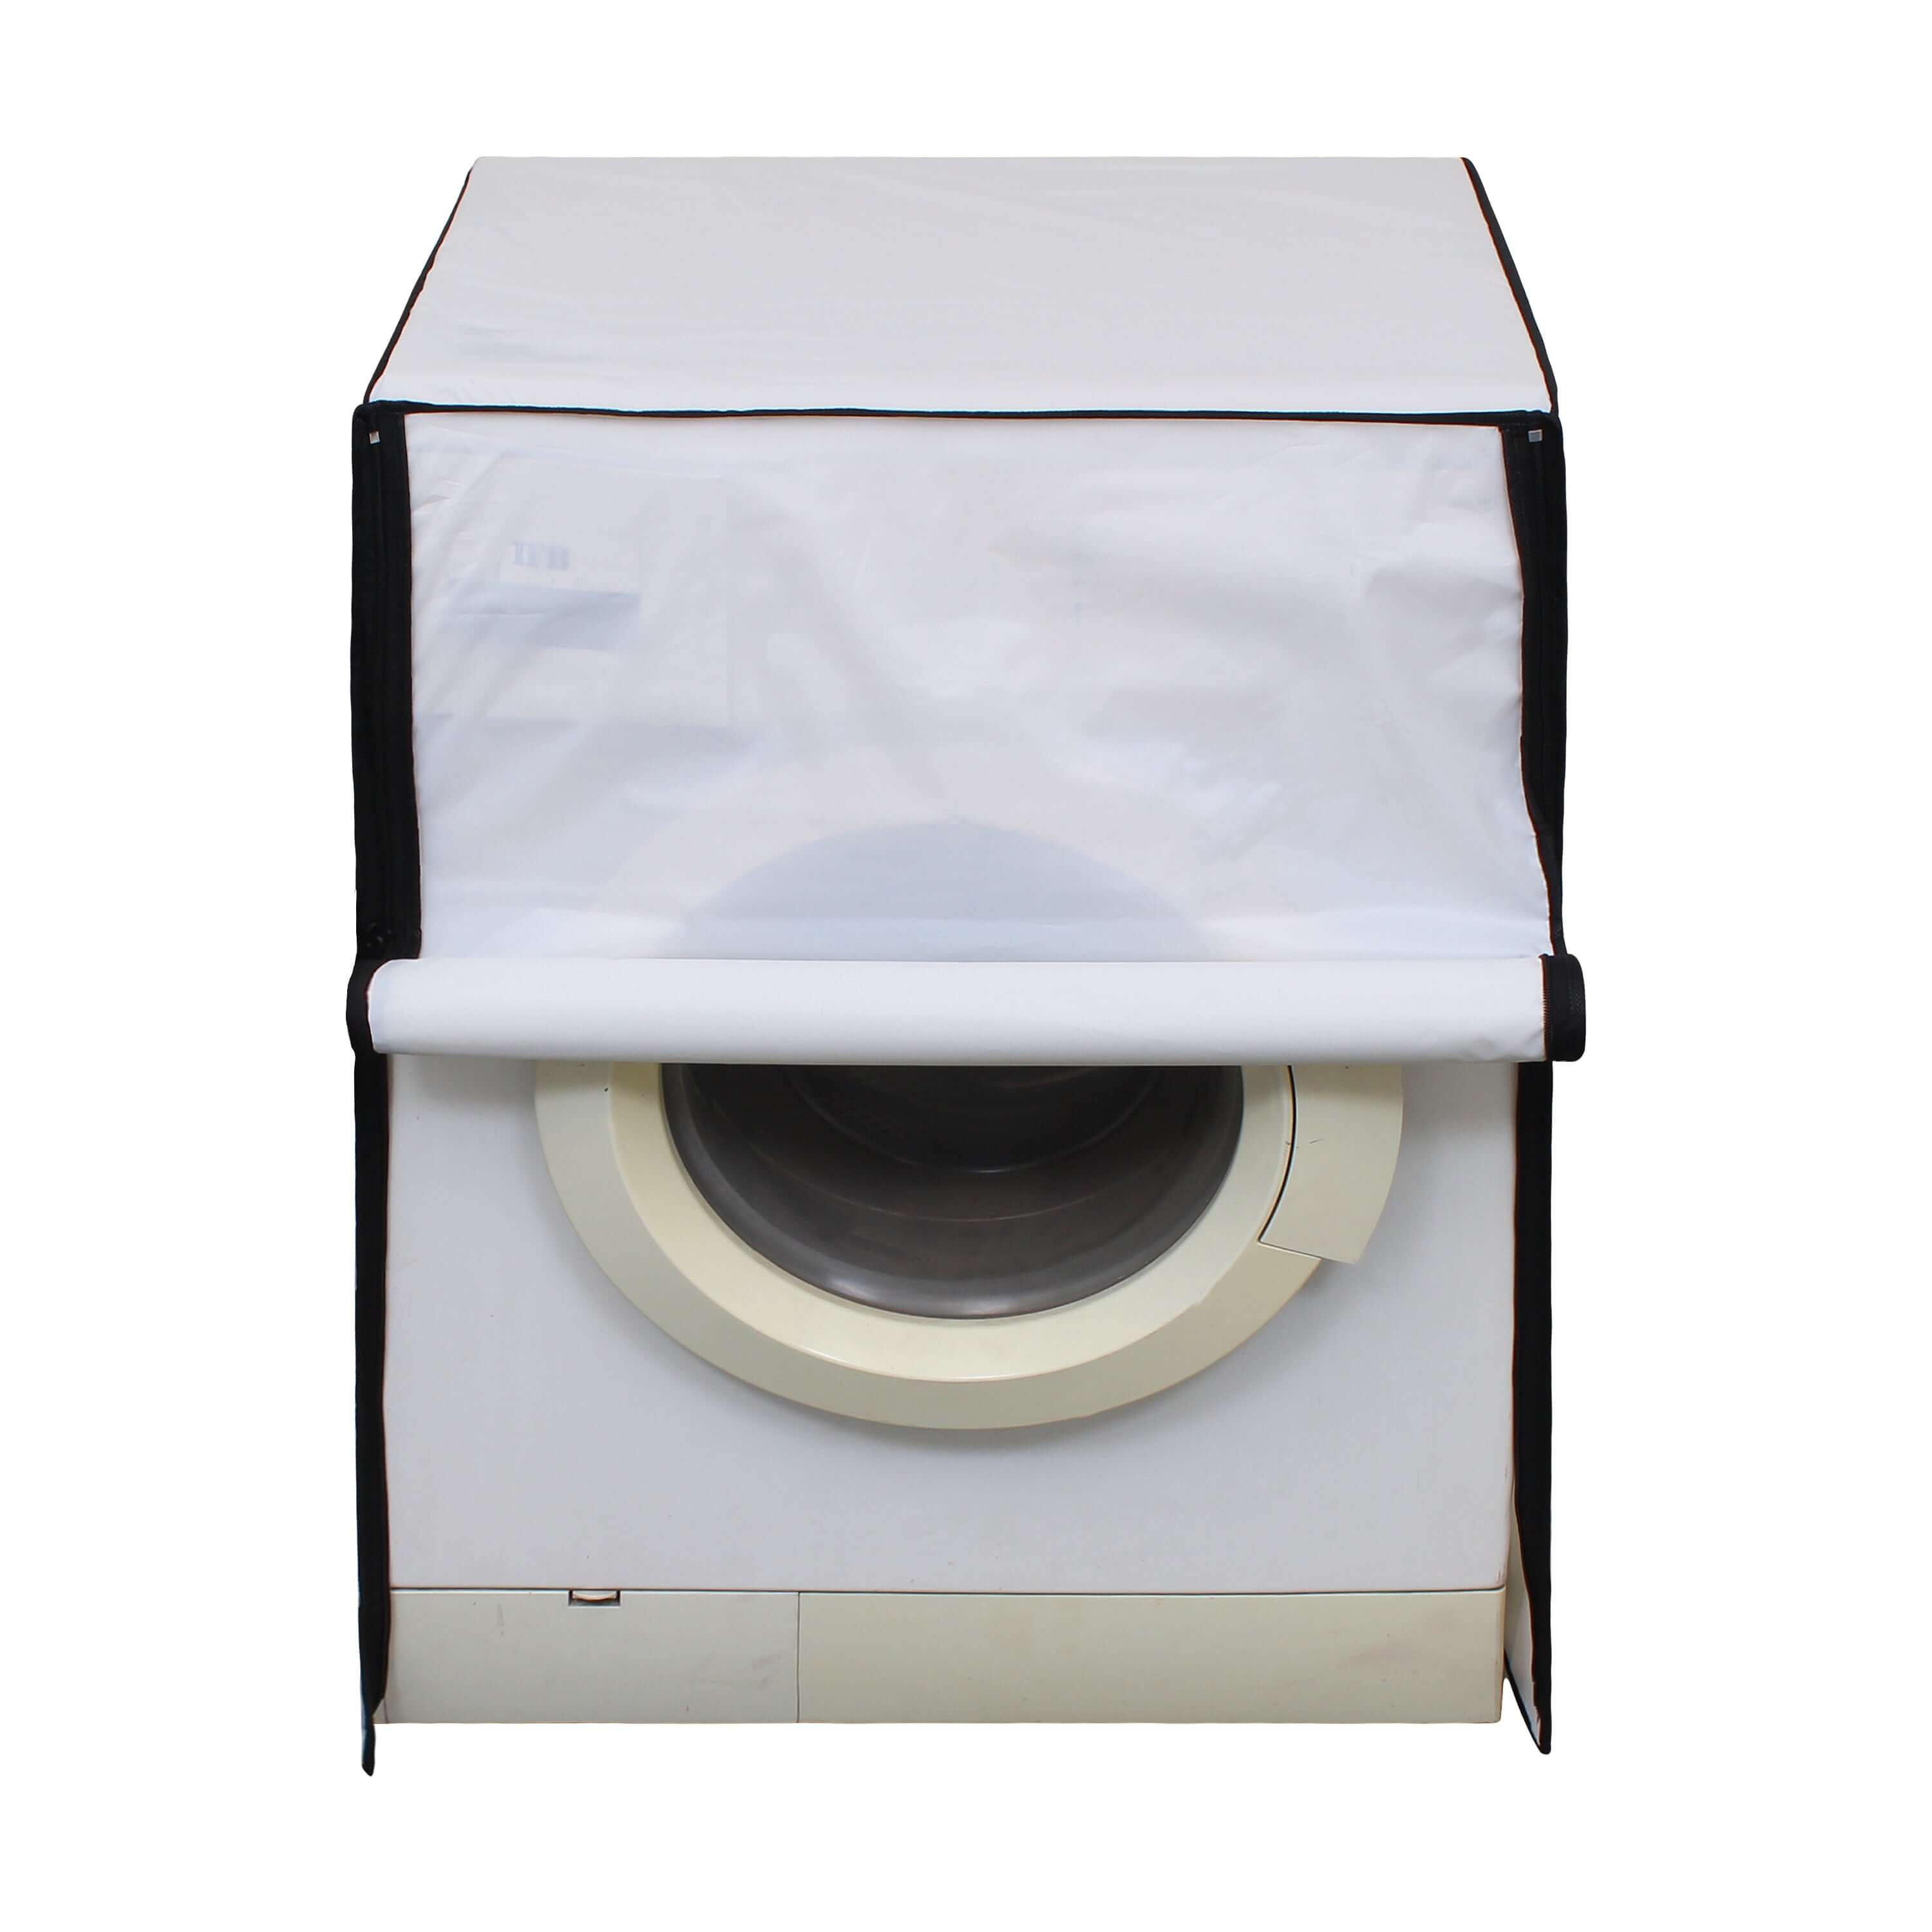 Fully Automatic Front Load Washing Machine Cover, Off White